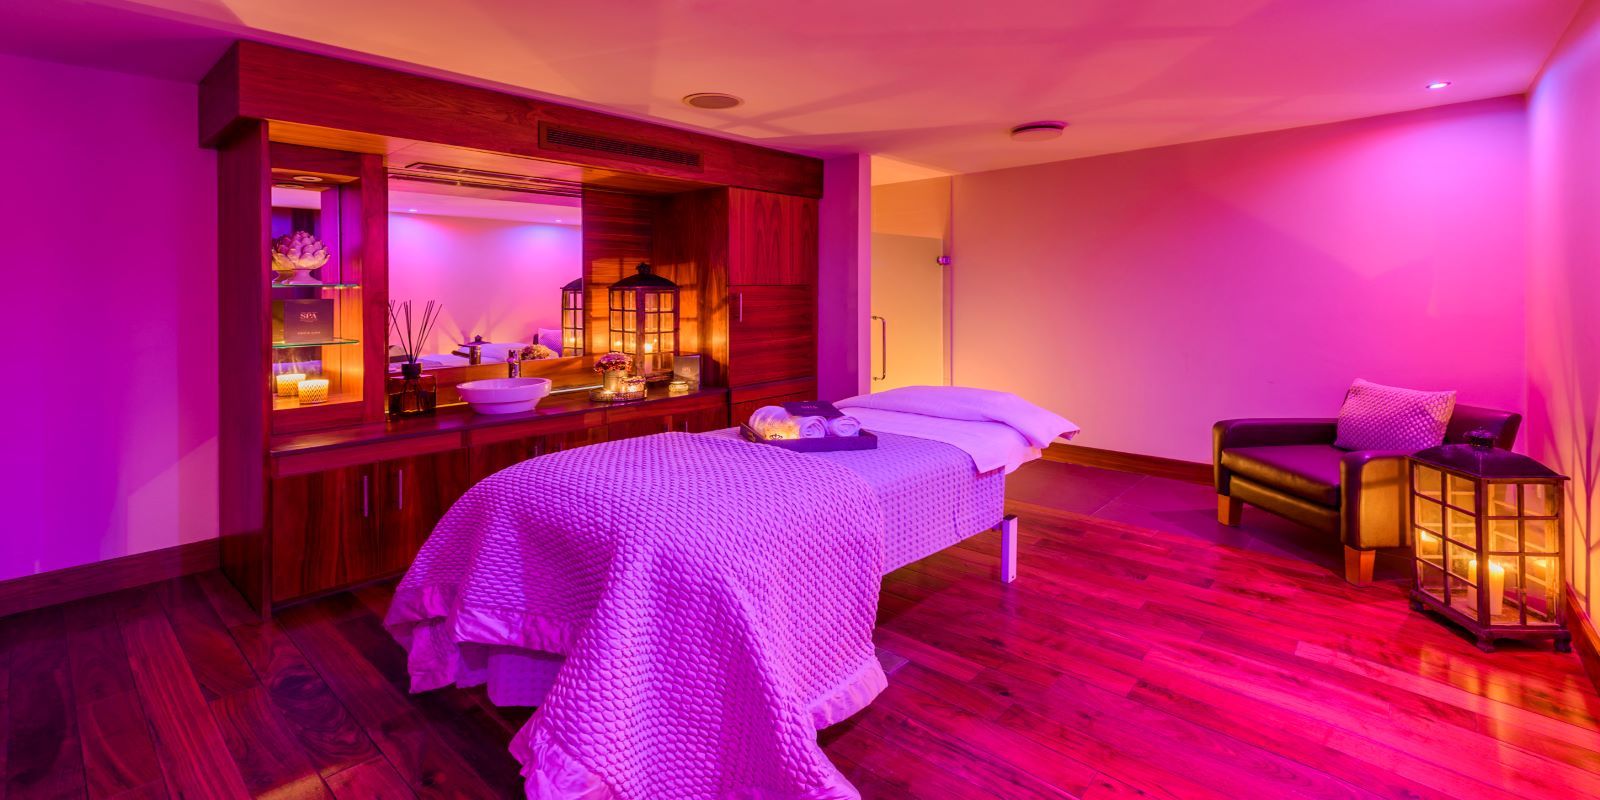 Shearwater Hotel - Spa CMS Treatment room